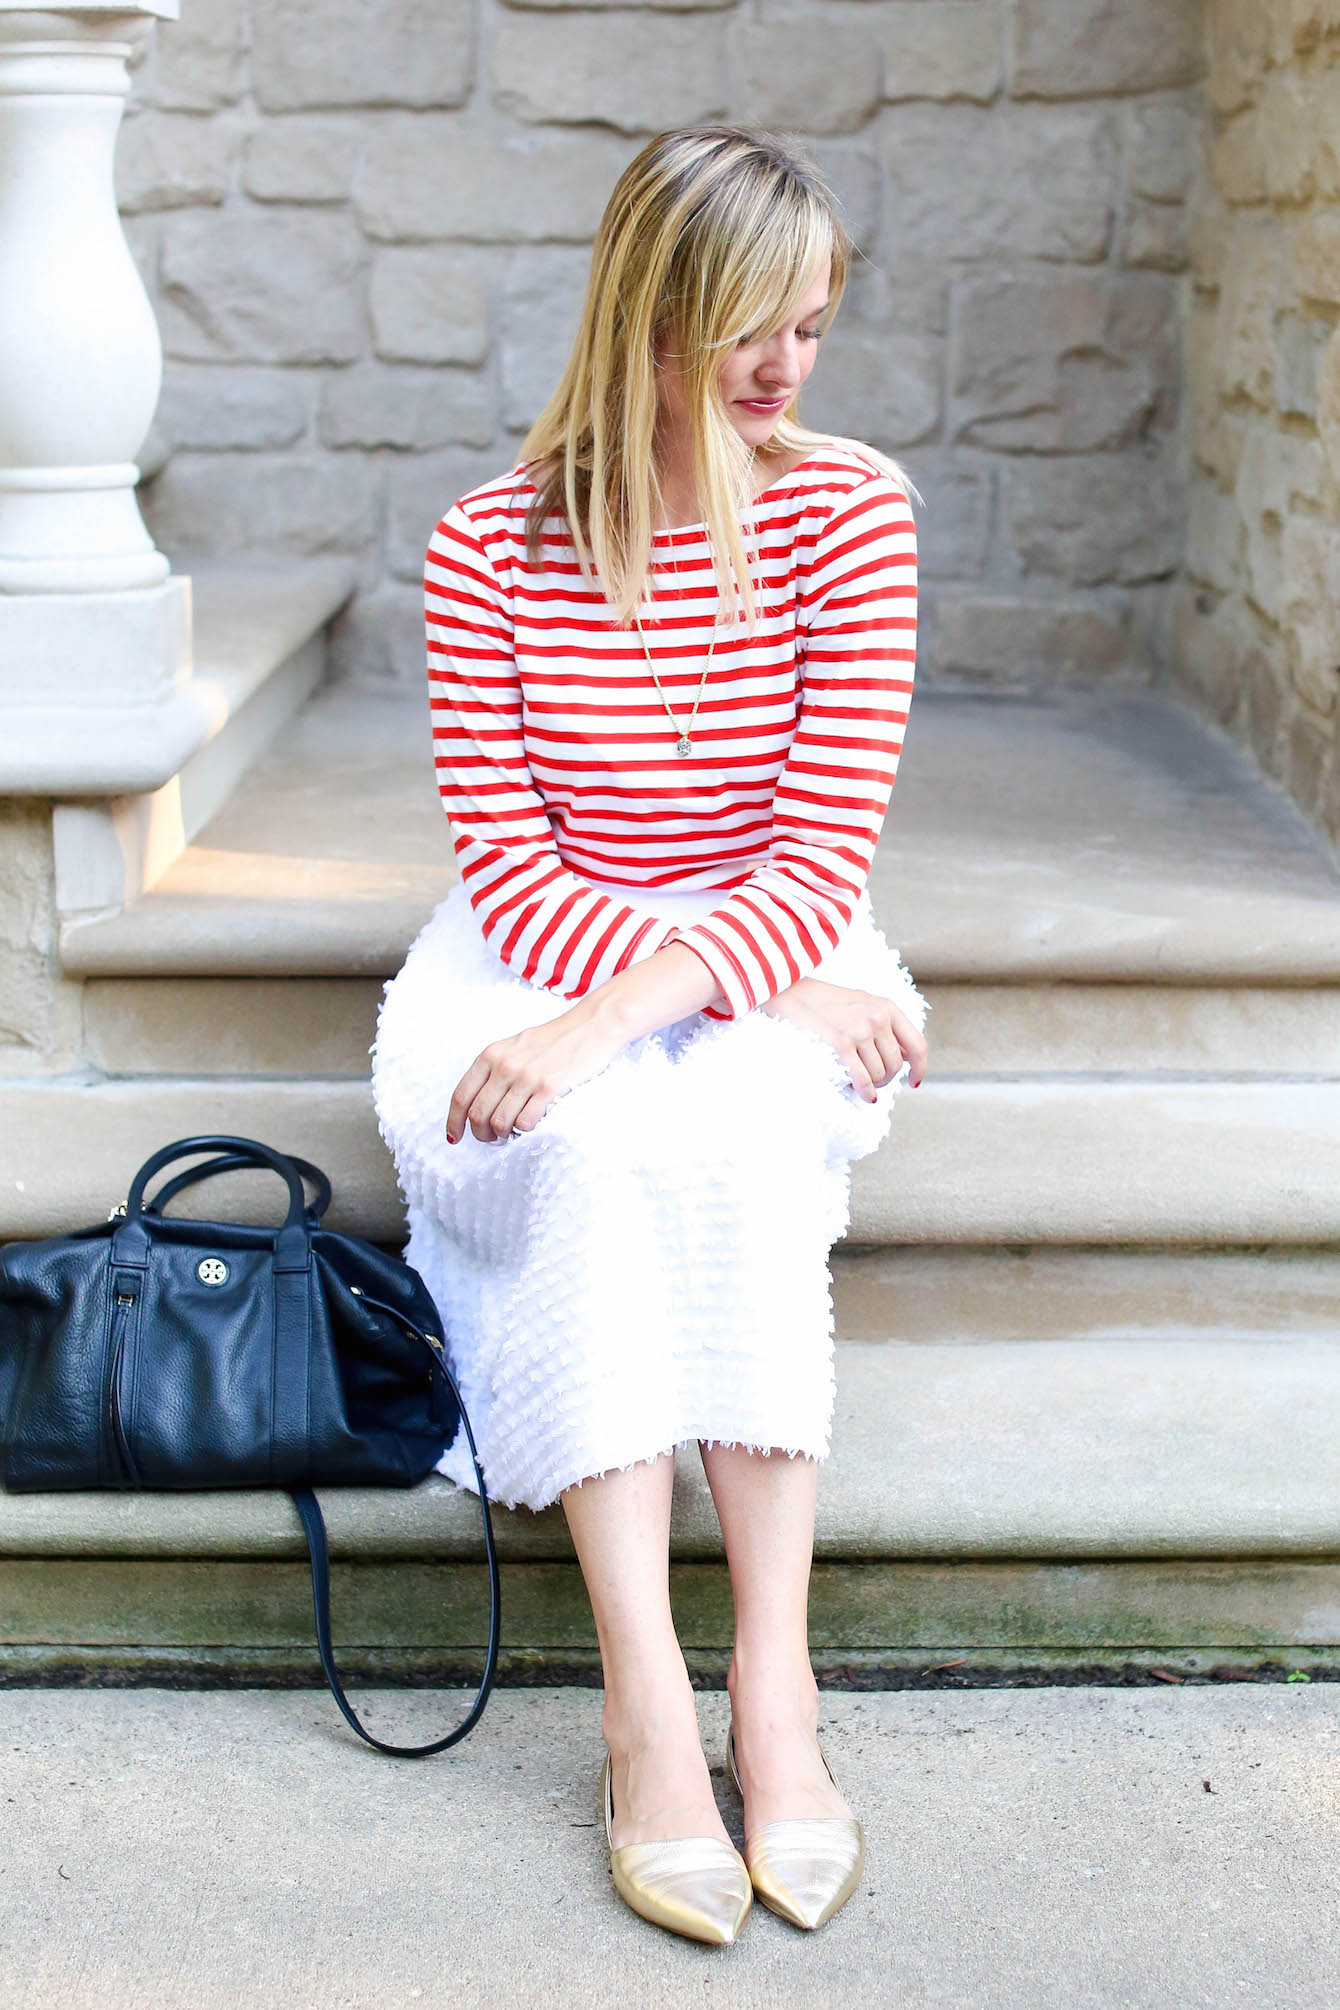 Charmingly-Styled-Stripes (7 of 16)